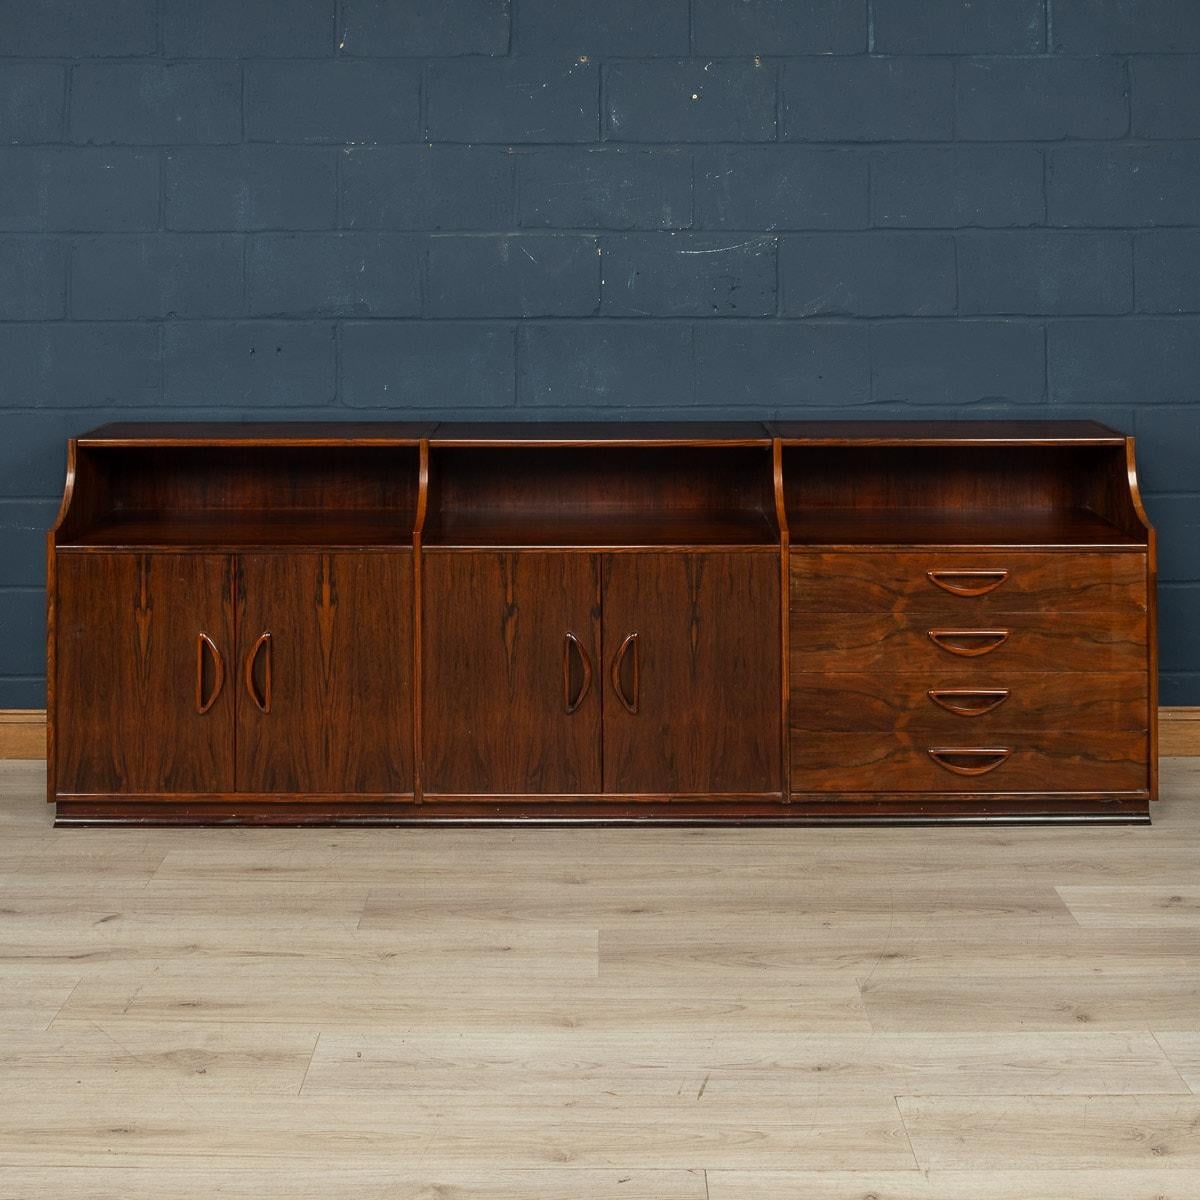 A large rosewood sideboard made in Italy around the middle of the 20th century. The sideboard consists of three sections, two with doors opening to reveal shelves for storage, the other with a bank of four drawers. The beautiful inset handles, so